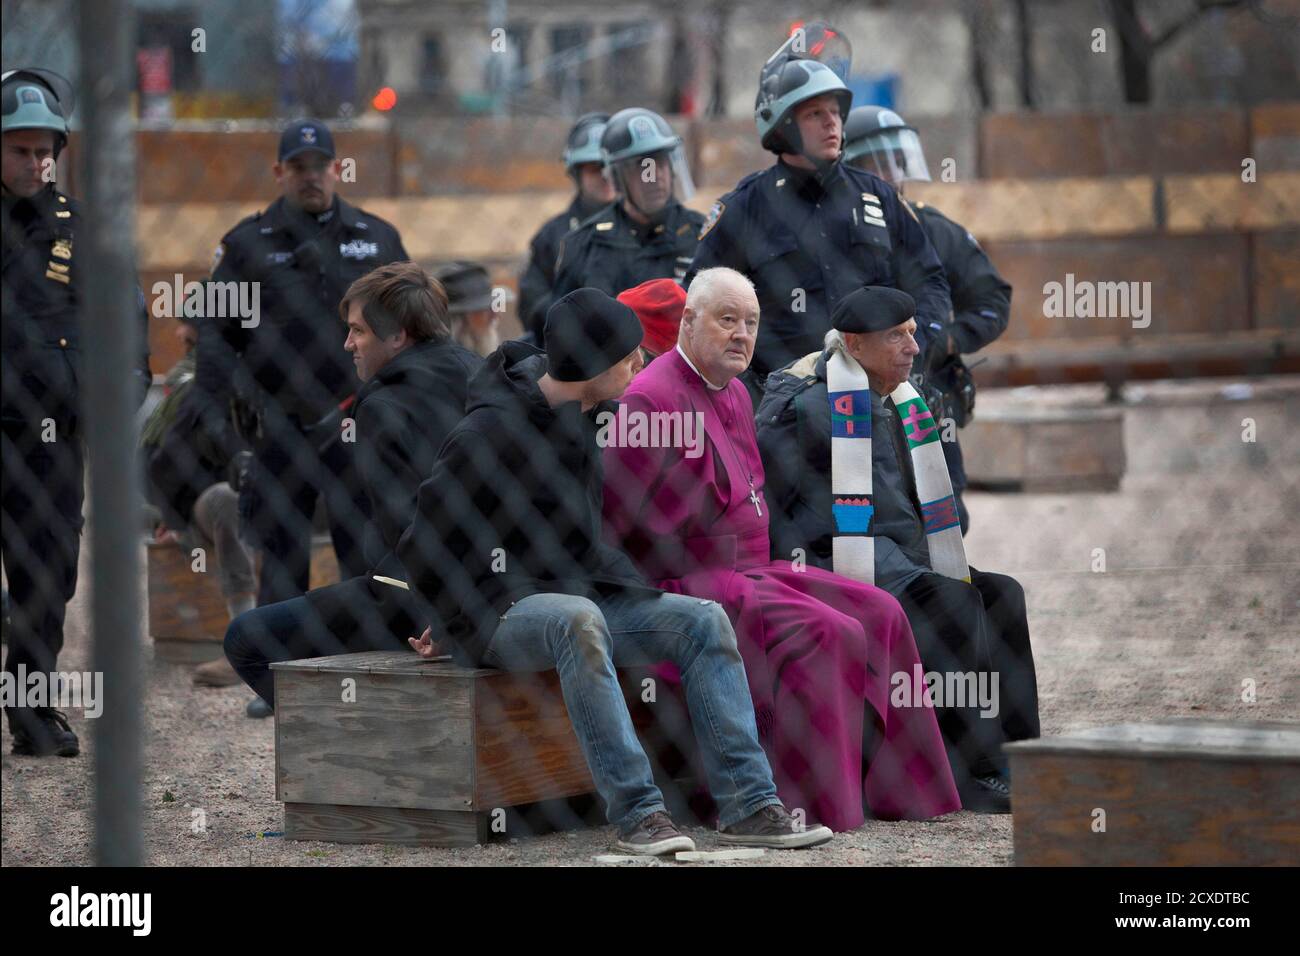 Retired Episcopal bishop George E. Packard (purple robe) and other protesters affiliated with the Occupy Wall Street movement are detained after climbing a ladder to illegally trespass on a privately-owned piece of land near Juan Pablo Duarte Square during a march in New York December 17, 2011. Hundreds of anti-Wall Street protesters took to the New York streets on Saturday in an attempt to establish a new encampment, with a number arrested as they tried to move onto church-owned land. REUTERS/Andrew Burton (UNITED STATES - Tags: CIVIL UNREST POLITICS BUSINESS RELIGION CRIME LAW) Stock Photo